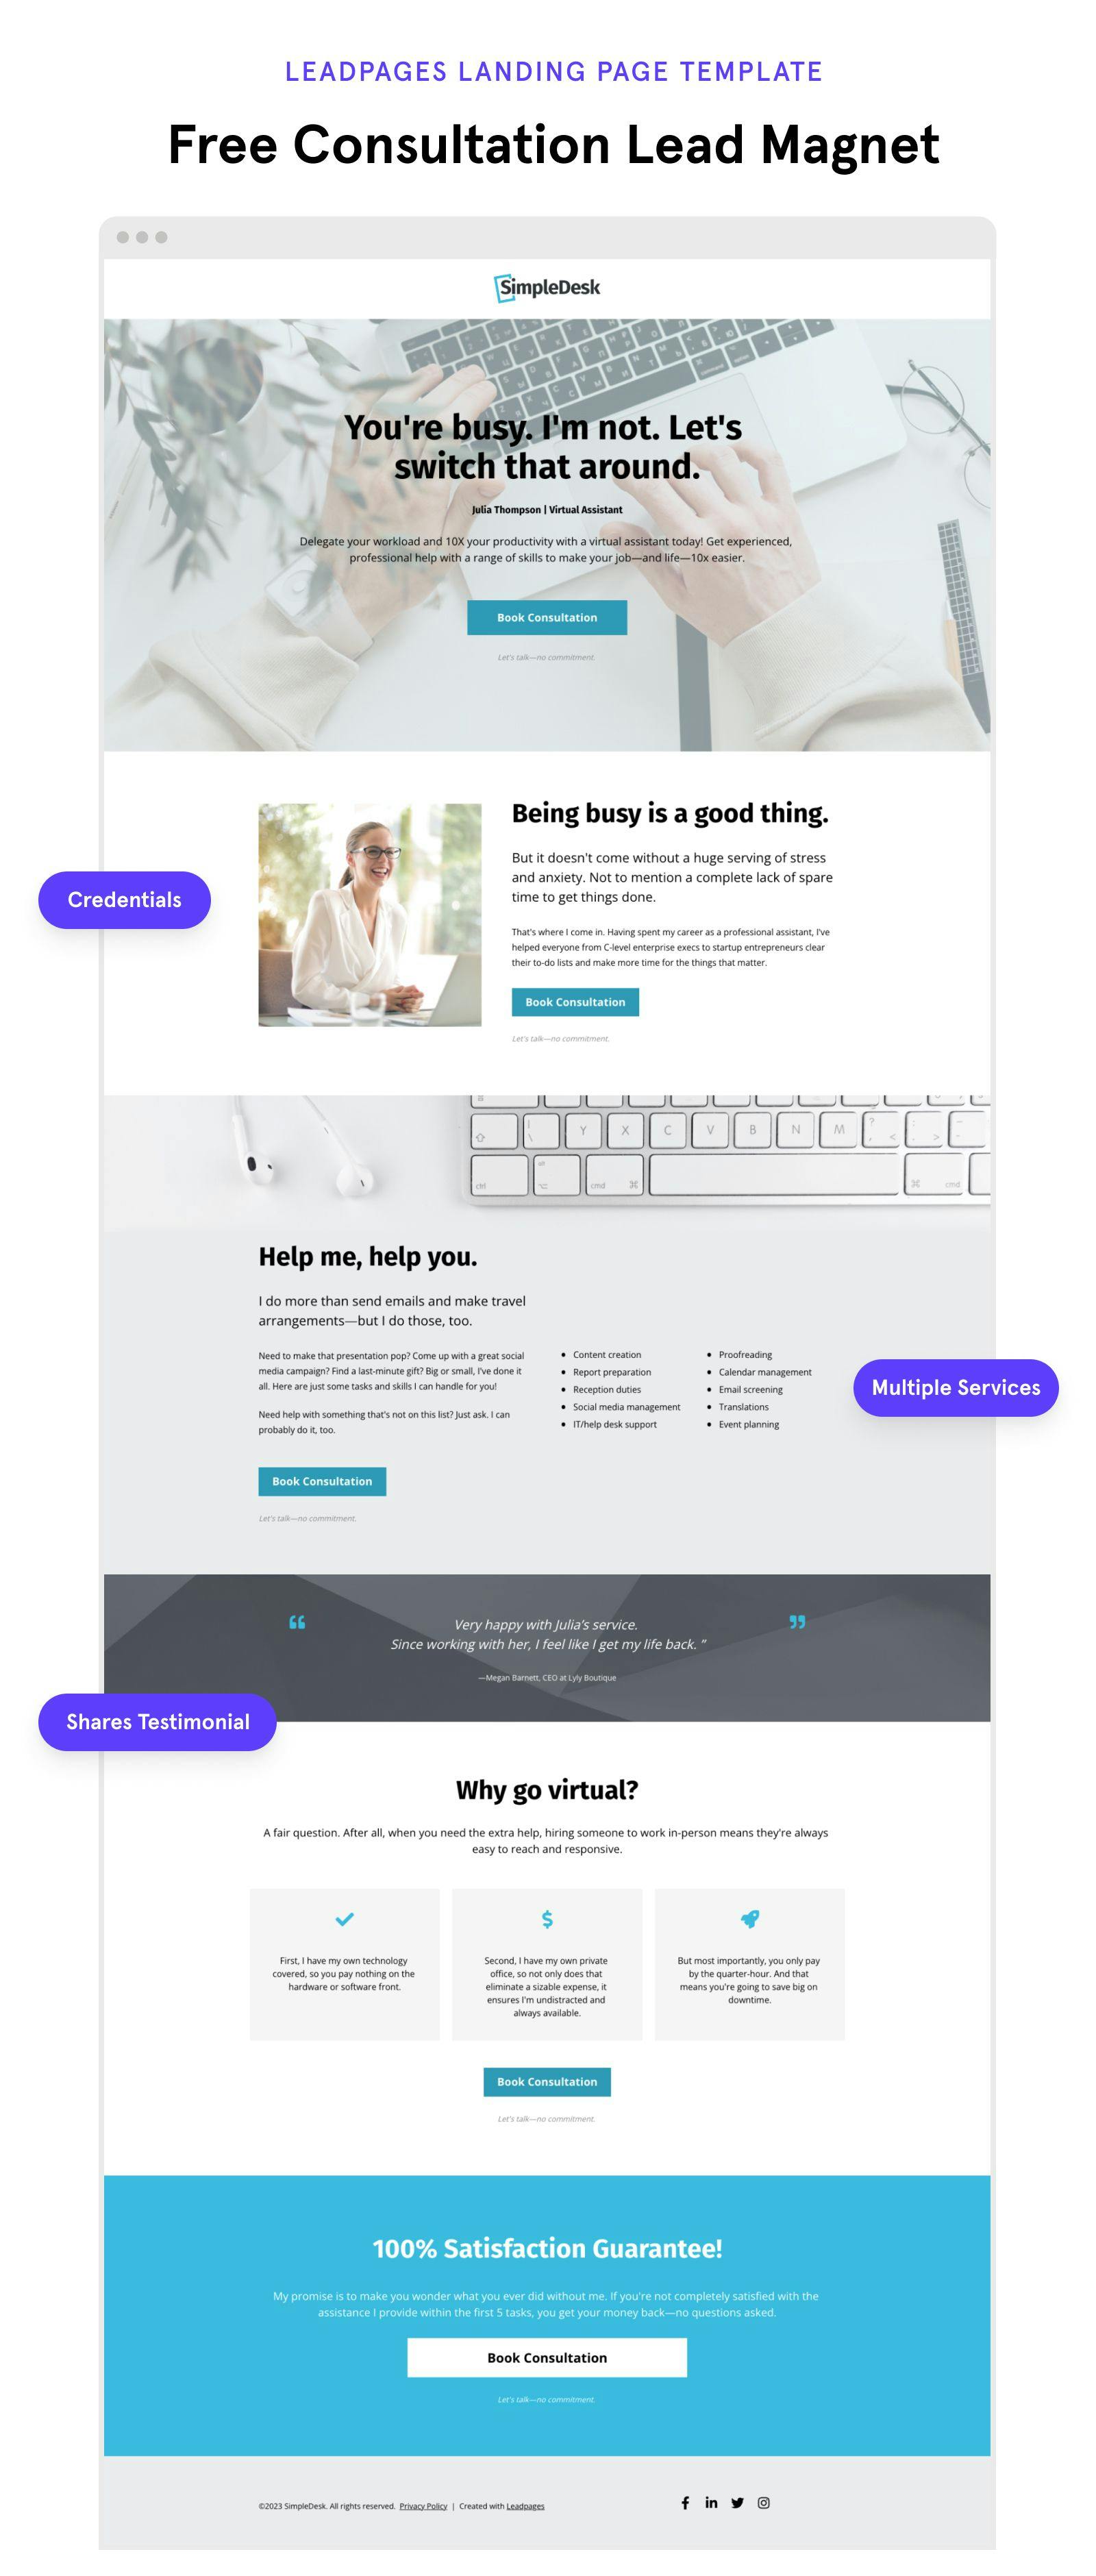 Free consultation lead magnet landing page template